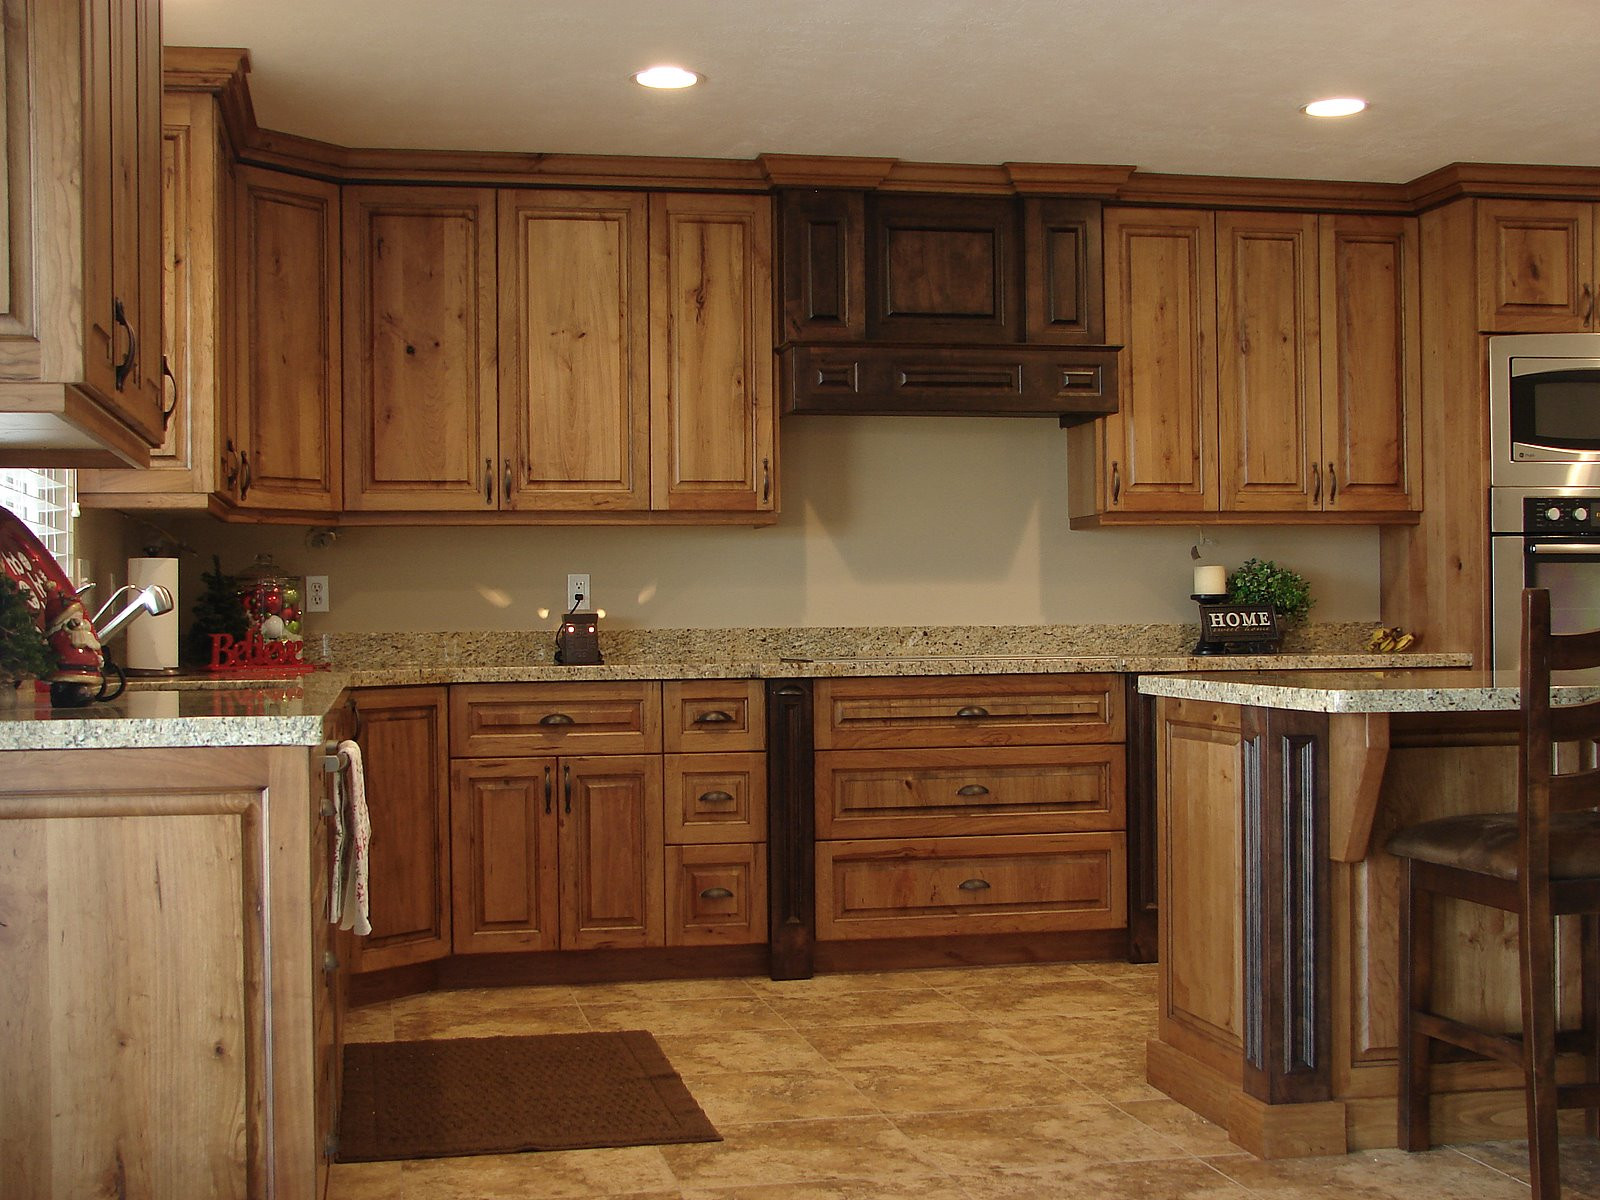 Kitchen Cabinet Rustic
 LEC Cabinets Rustic Cherry Cabinets